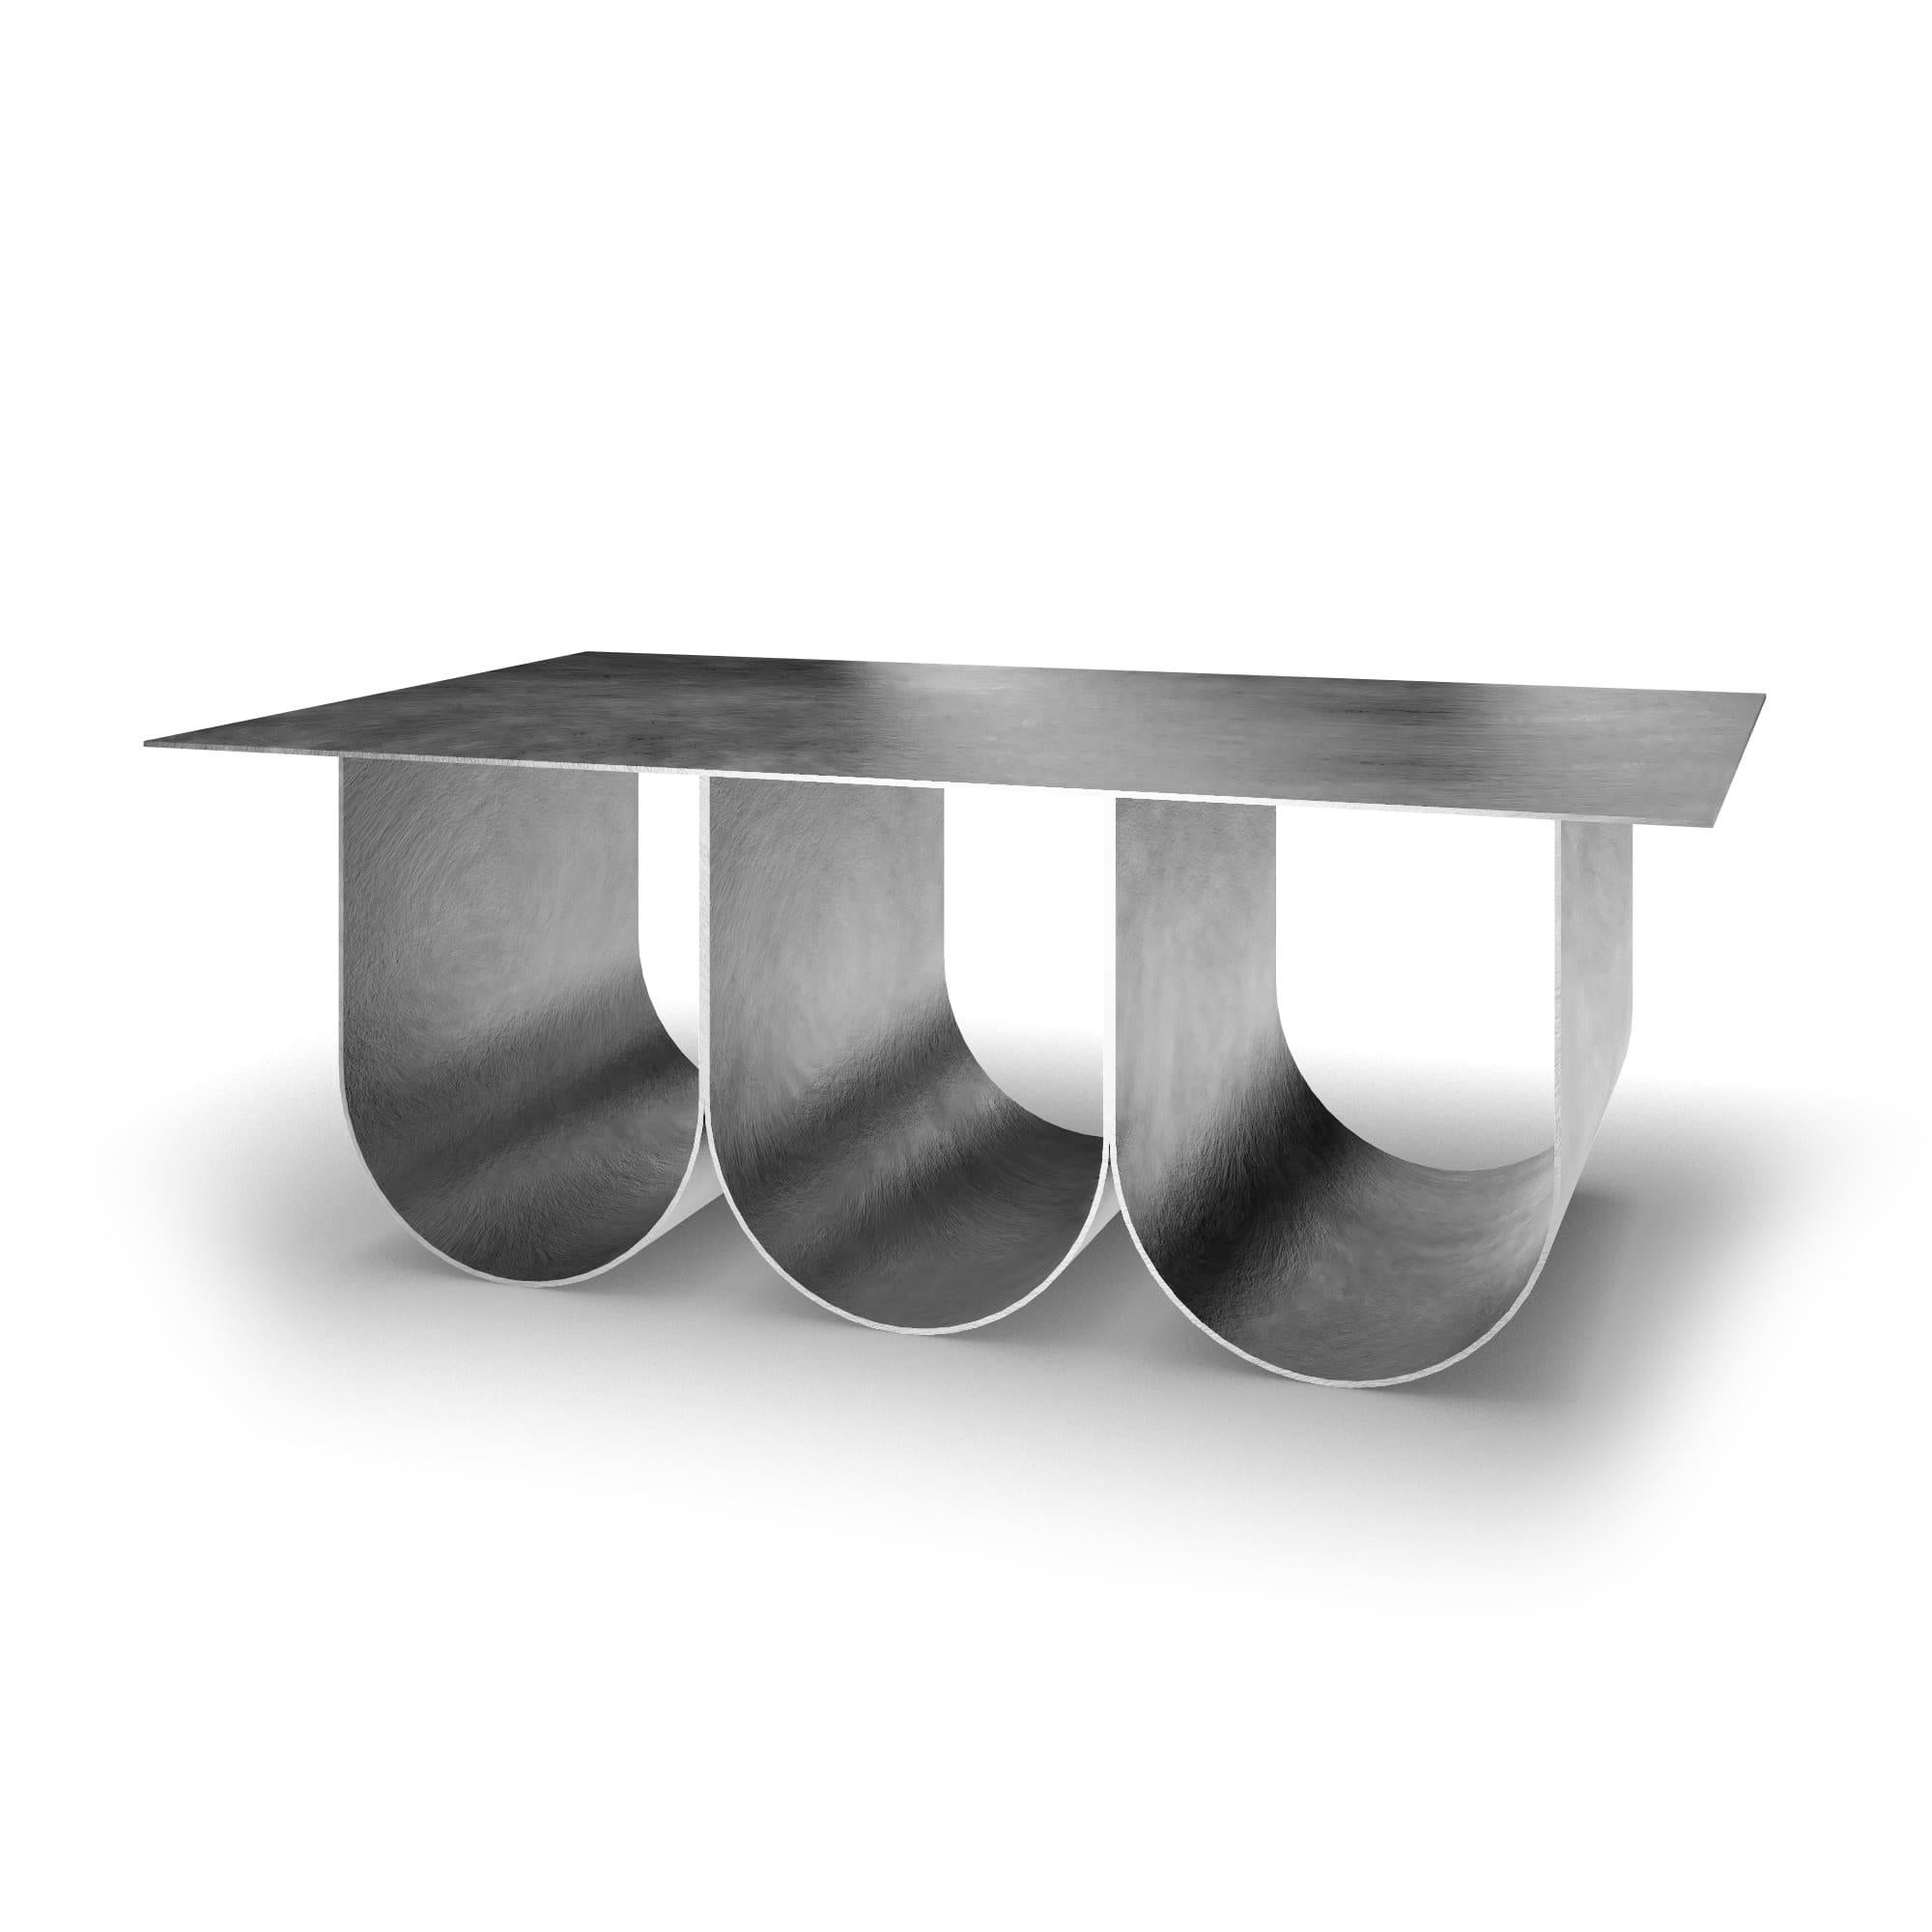 Portuguese Arcade Coffee Table, Square Stainless Steel Version, by Kasadamo & Pierre Tassin For Sale